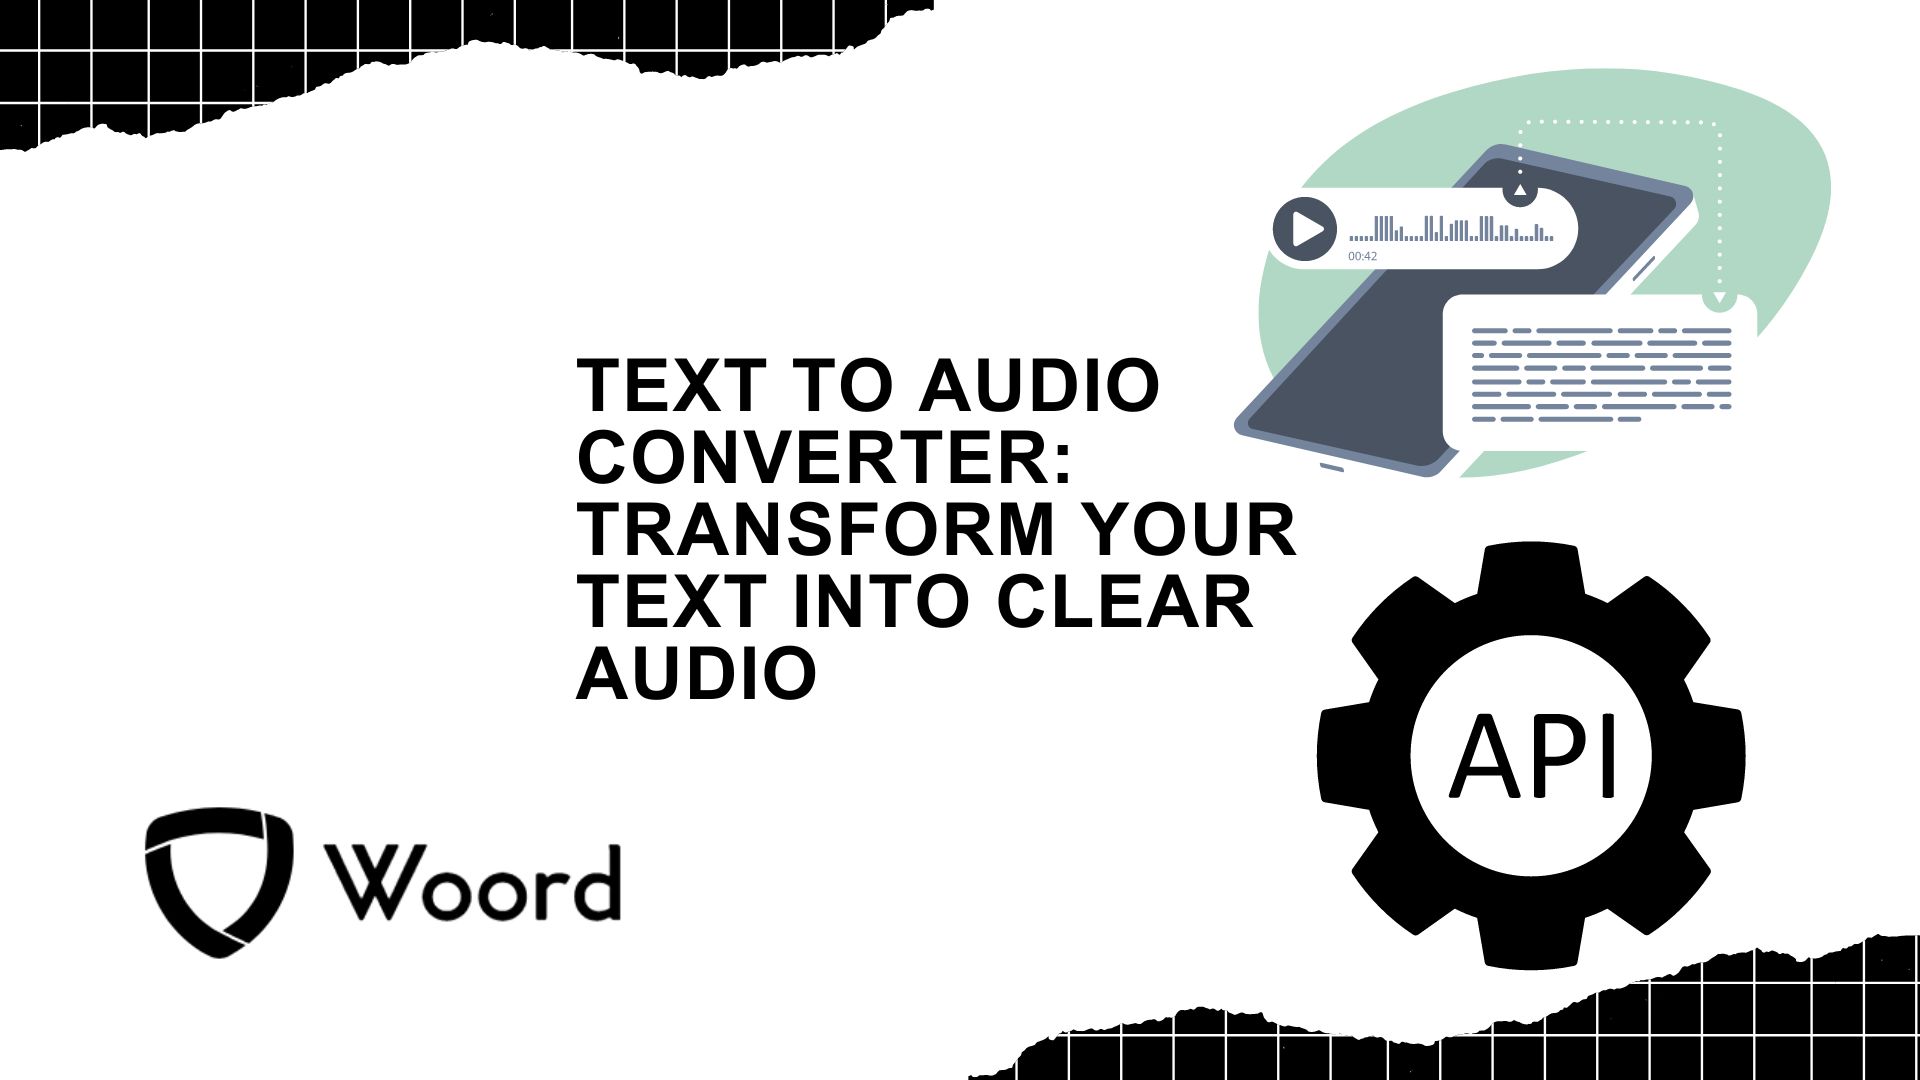 Text To Audio Converter: Transform Your Text Into Clear Audio